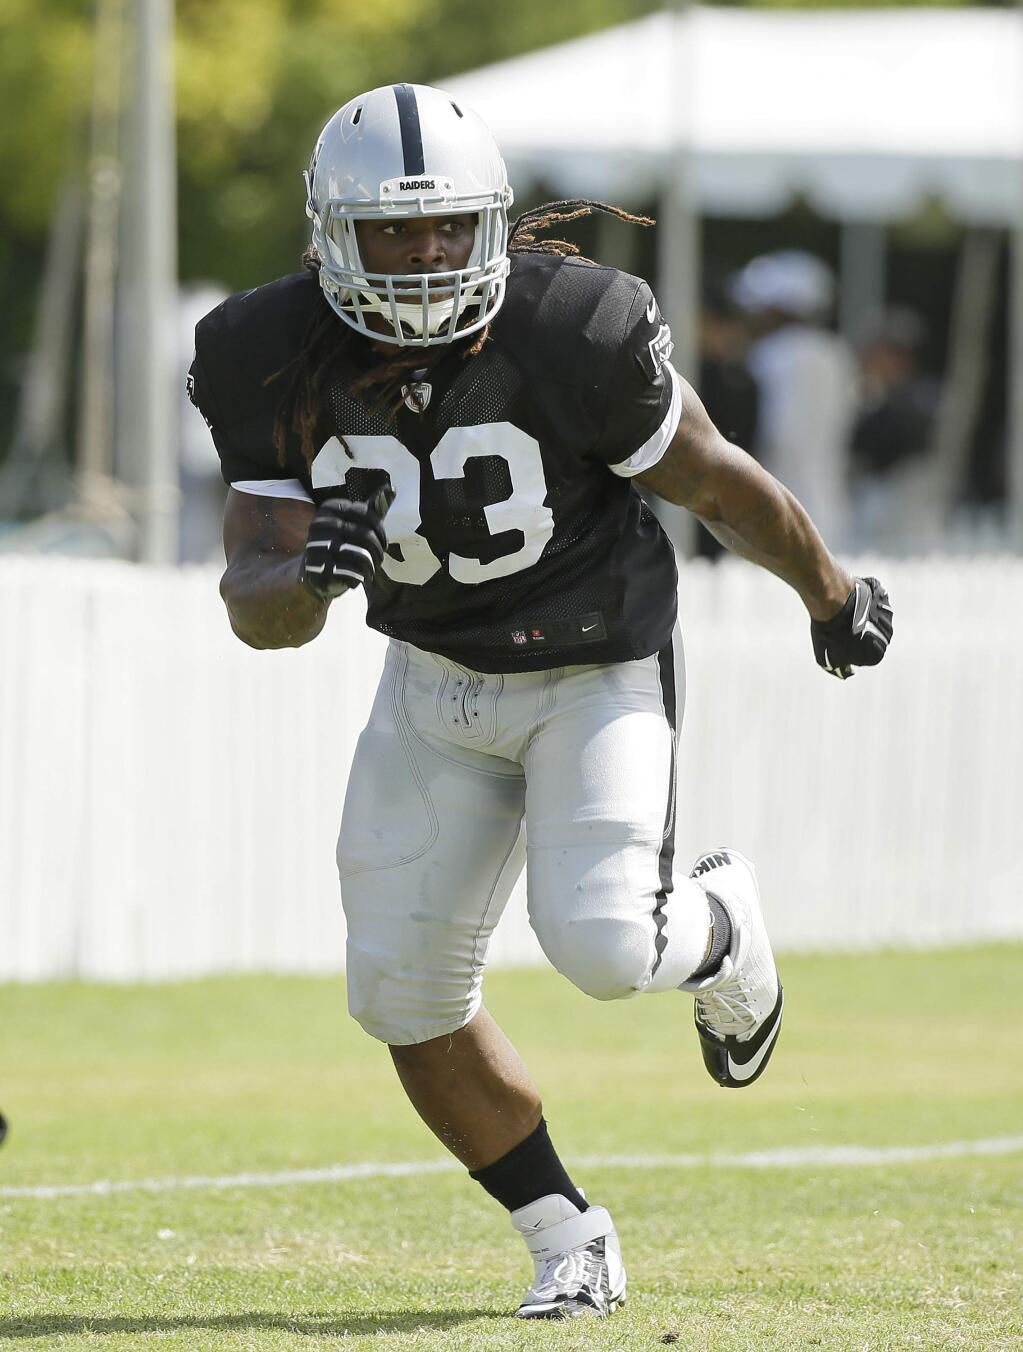 Oakland Raiders running back Trent Richardson runs to catch a pass during their football training camp Thursday, Aug. 6, 2015, in Napa, Calif. (AP Photo/Eric Risberg)